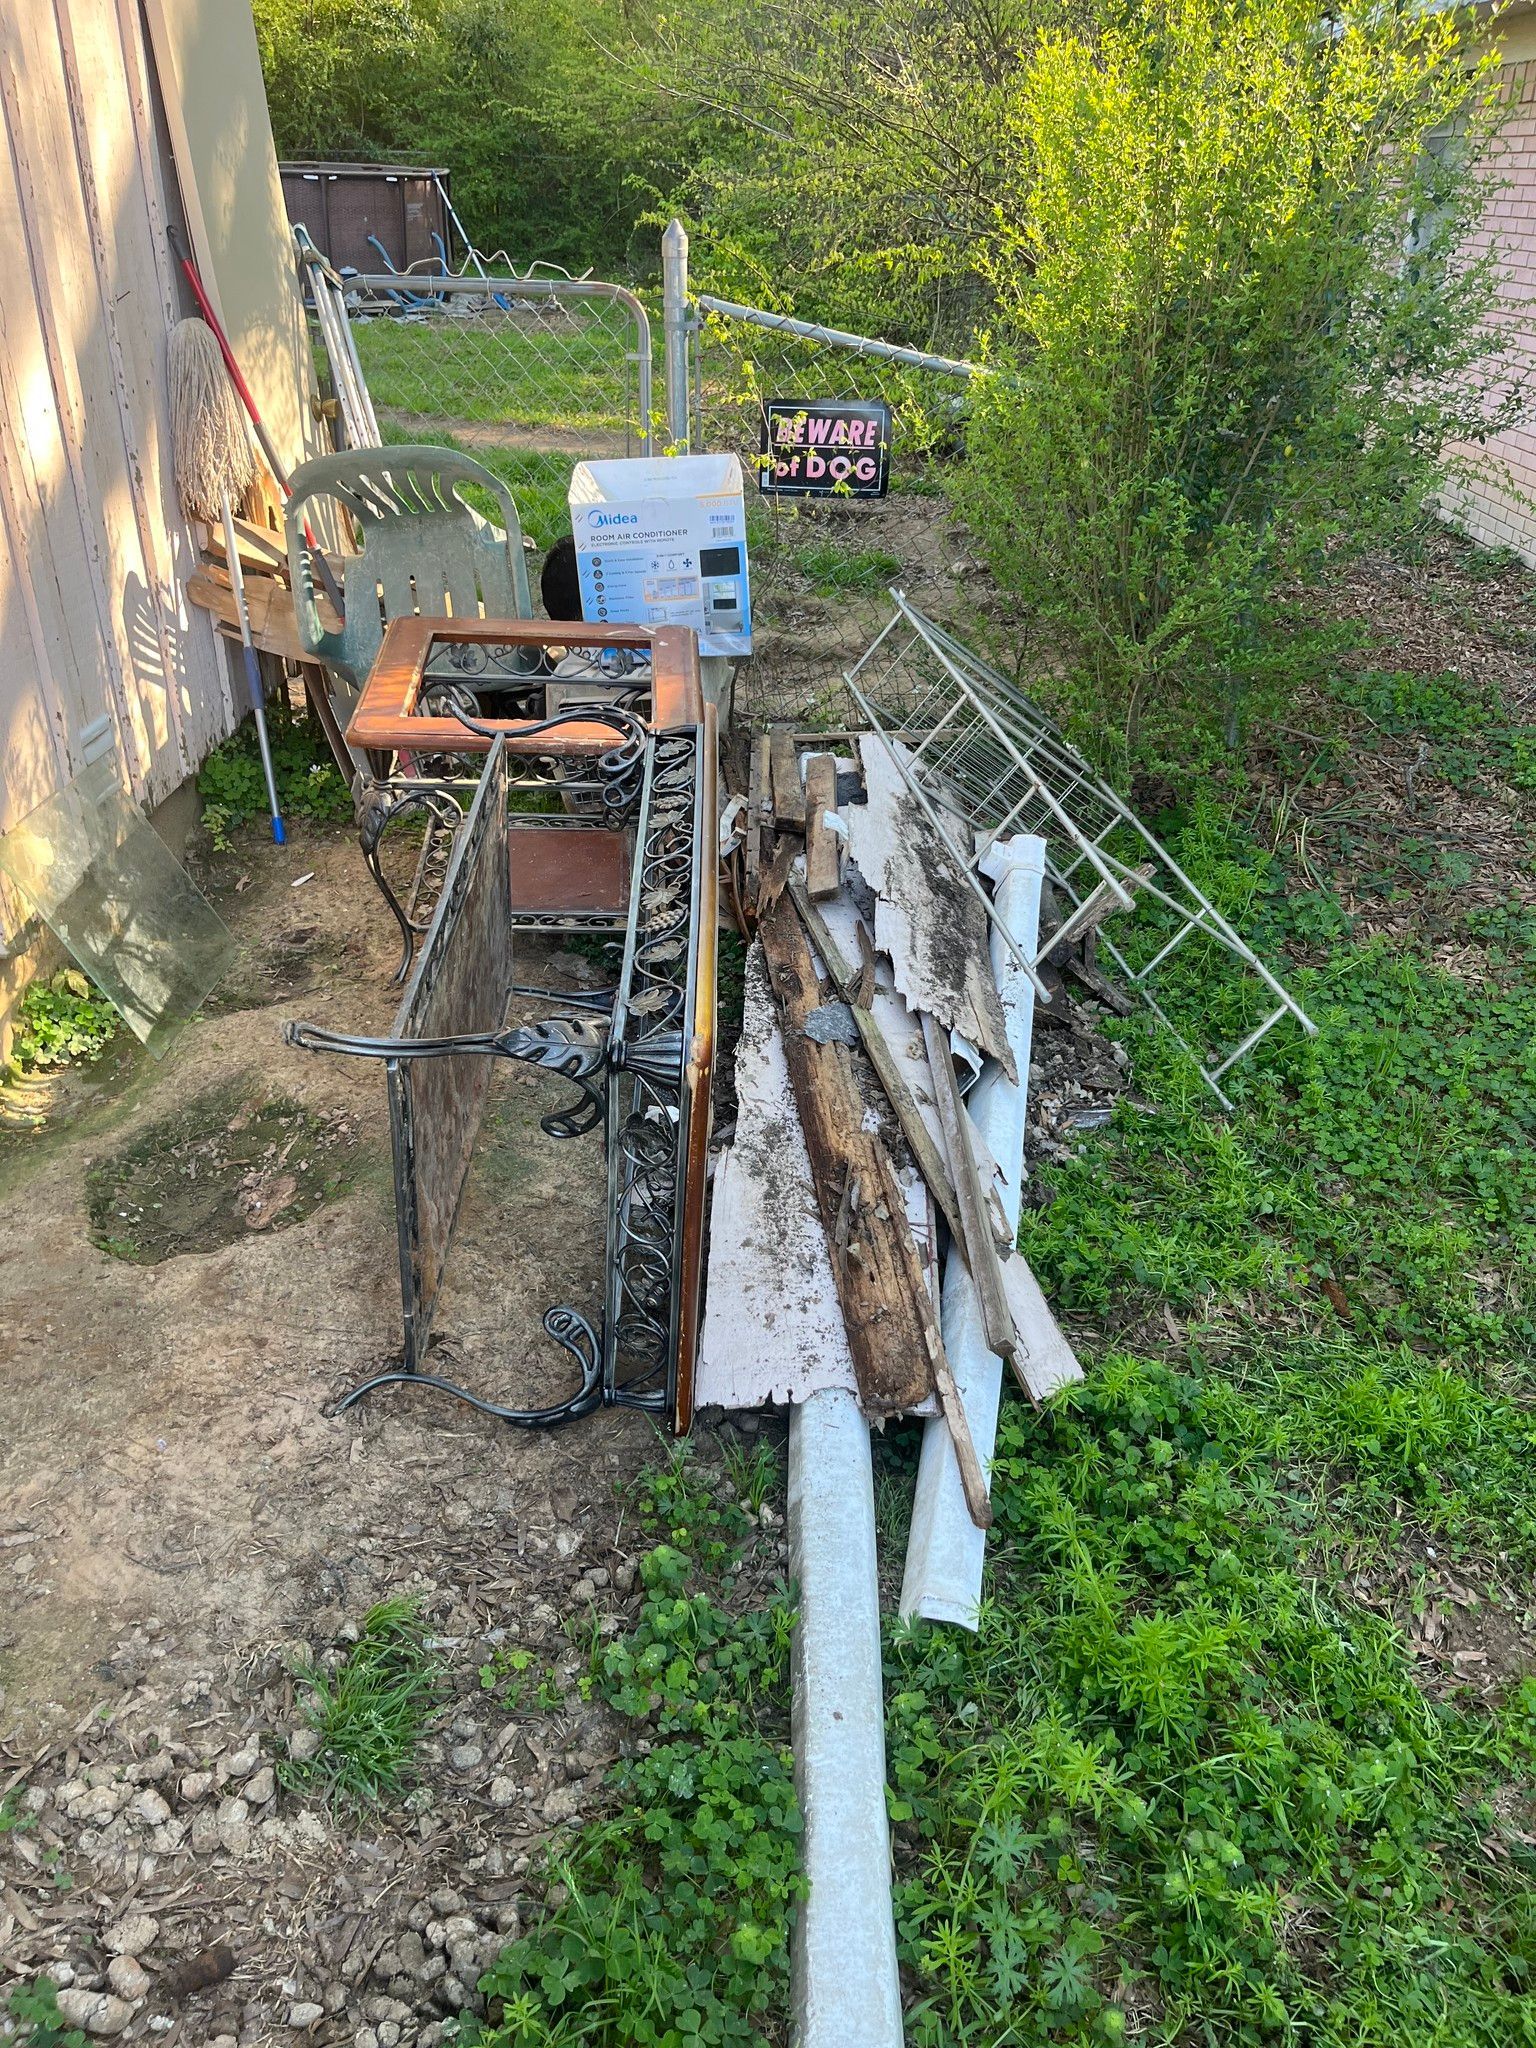 a machine is sitting in the grass next to a fence .